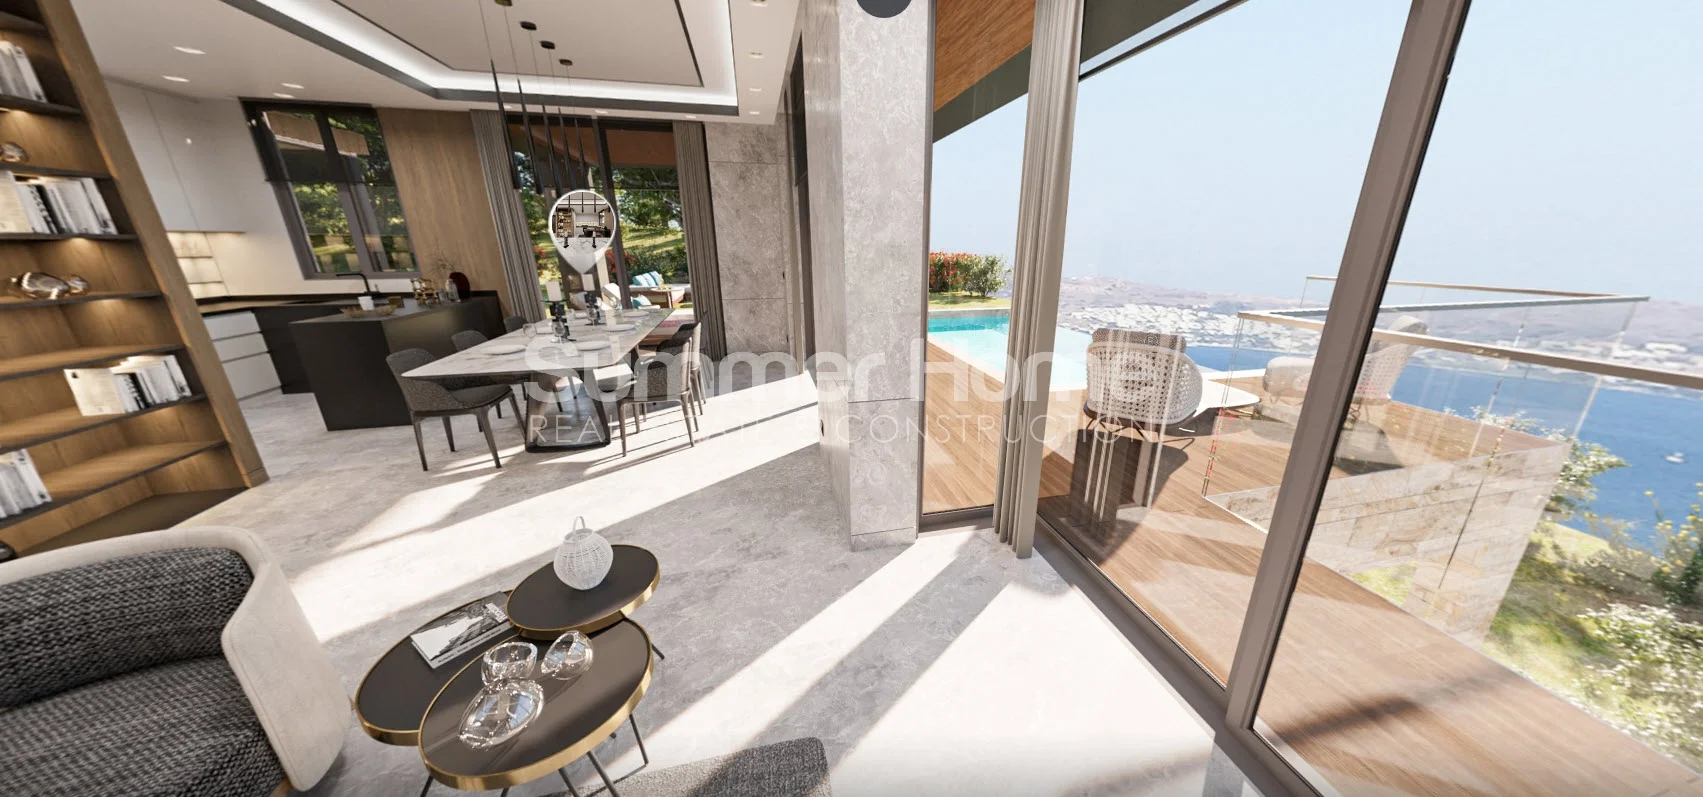 Luxurious sea view villas that offer an exclusive life in Bodrum Interior - 8